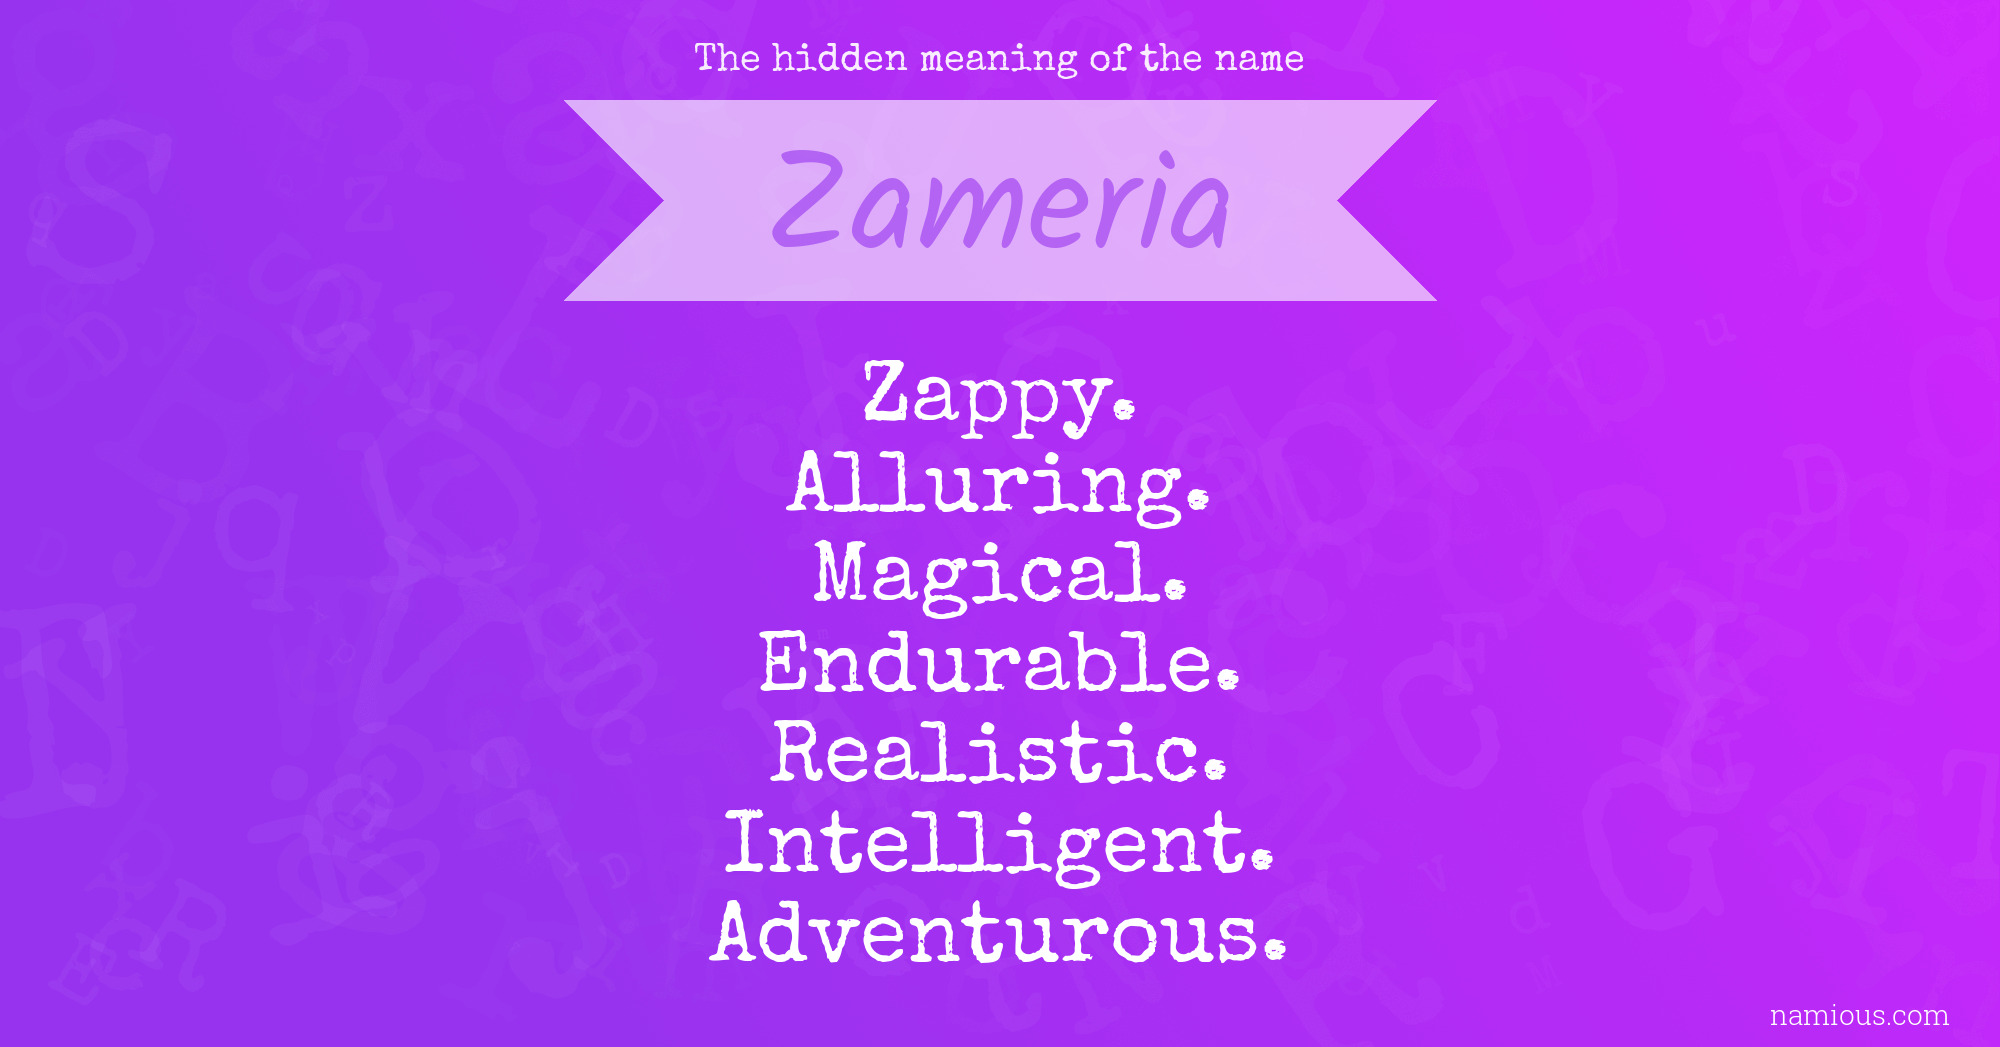 The hidden meaning of the name Zameria